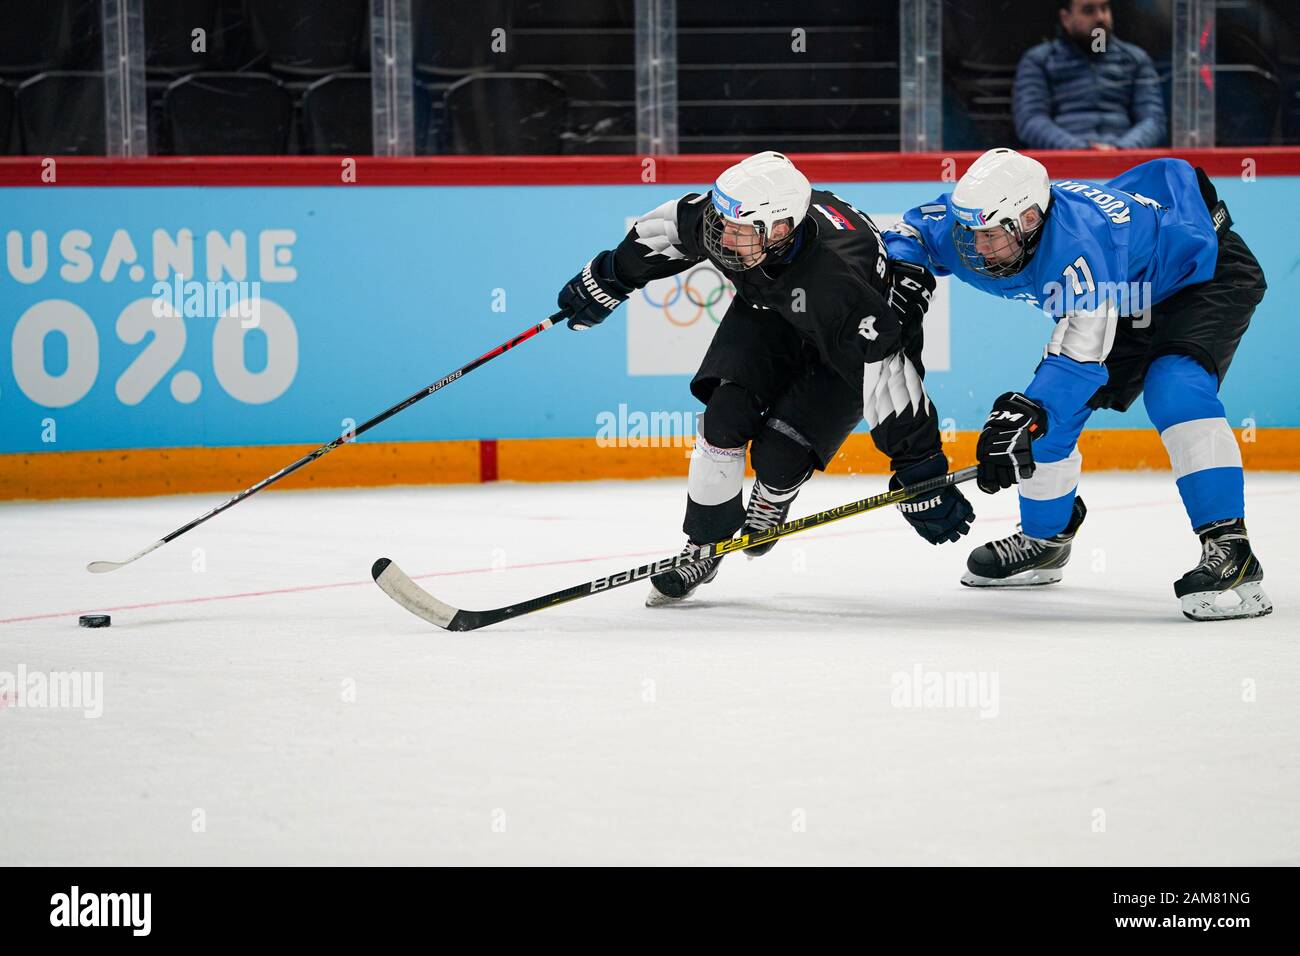 Lausanne, Switzerland. 11th Jan, 2020. Adam Sykora (L) from Slovakia of Black team competes with Konrad Kudeviita from Estonia of Blue team during the men's mixed ice hockey 3-on-3 preliminary round Game 9 between Blue team and Black team at the Lausanne 2020 Winter Youth Olympic Games (YOG) in Lausanne, Switzerland, Jan. 11, 2020. Credit: Bai Xueqi/Xinhua/Alamy Live News Stock Photo